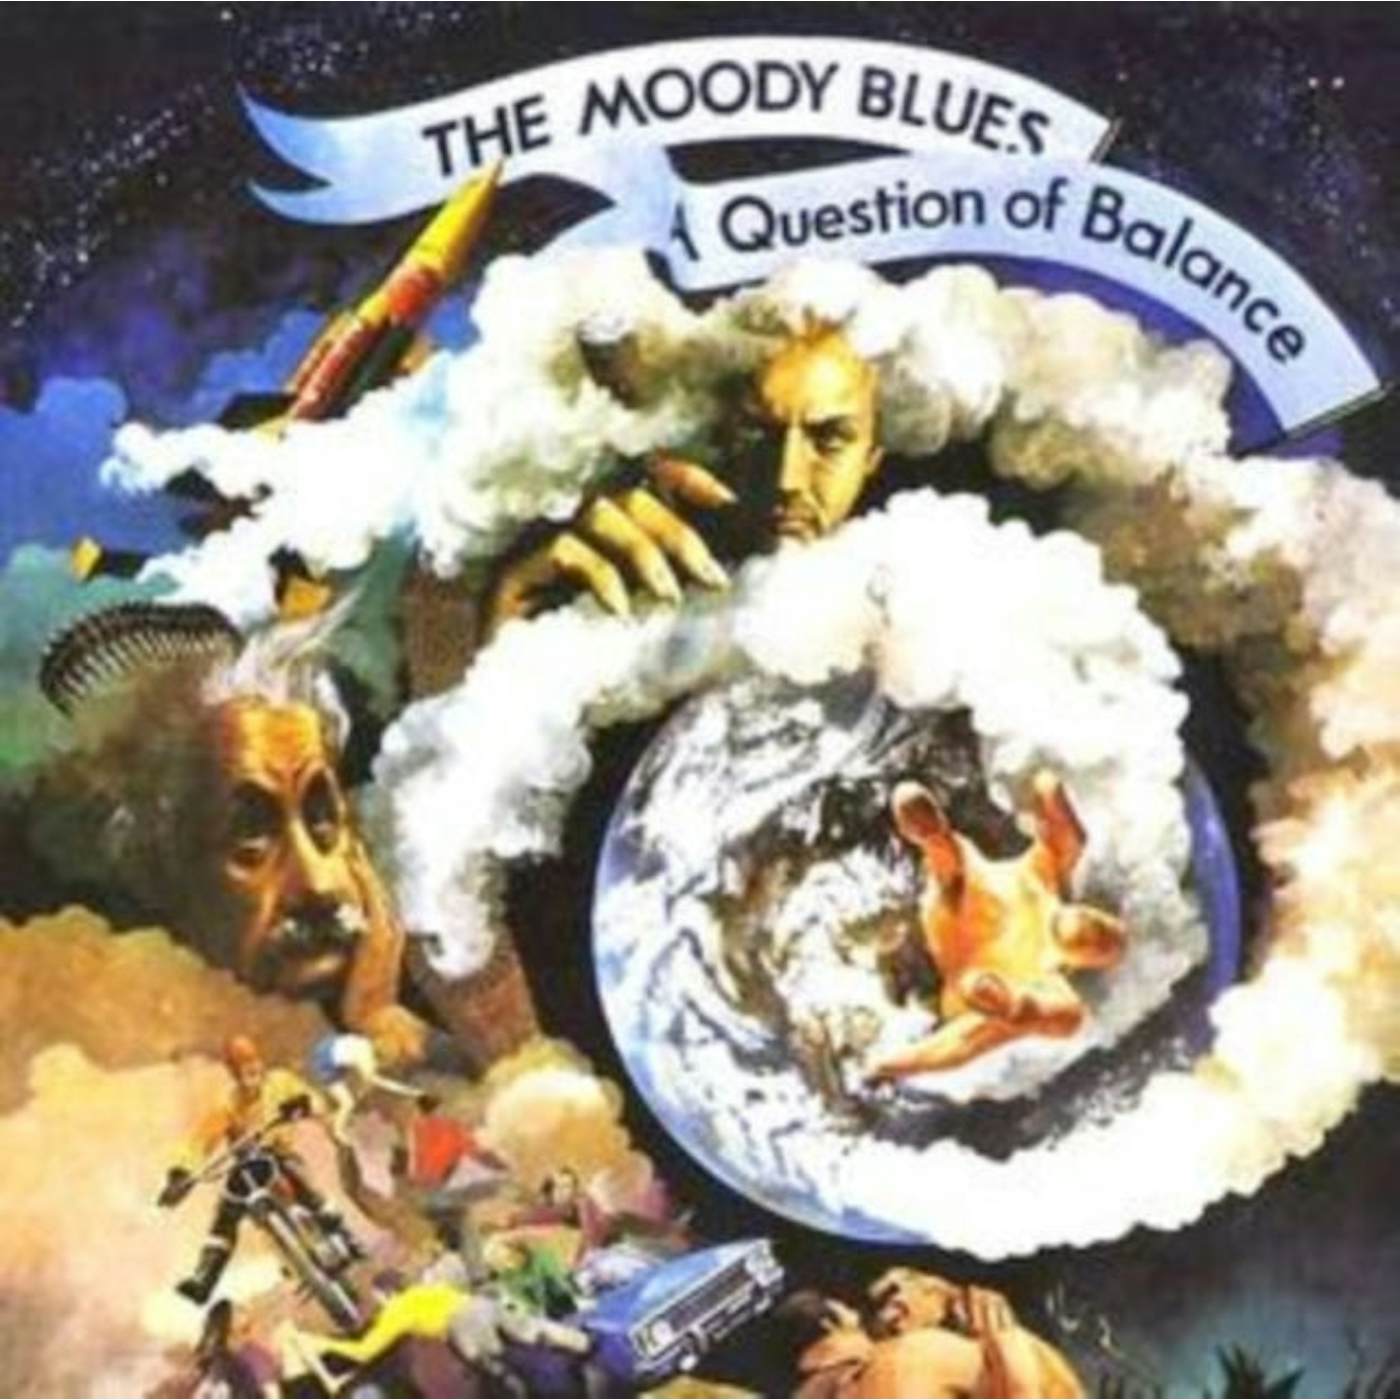 The Moody Blues CD - A Question Of Balance